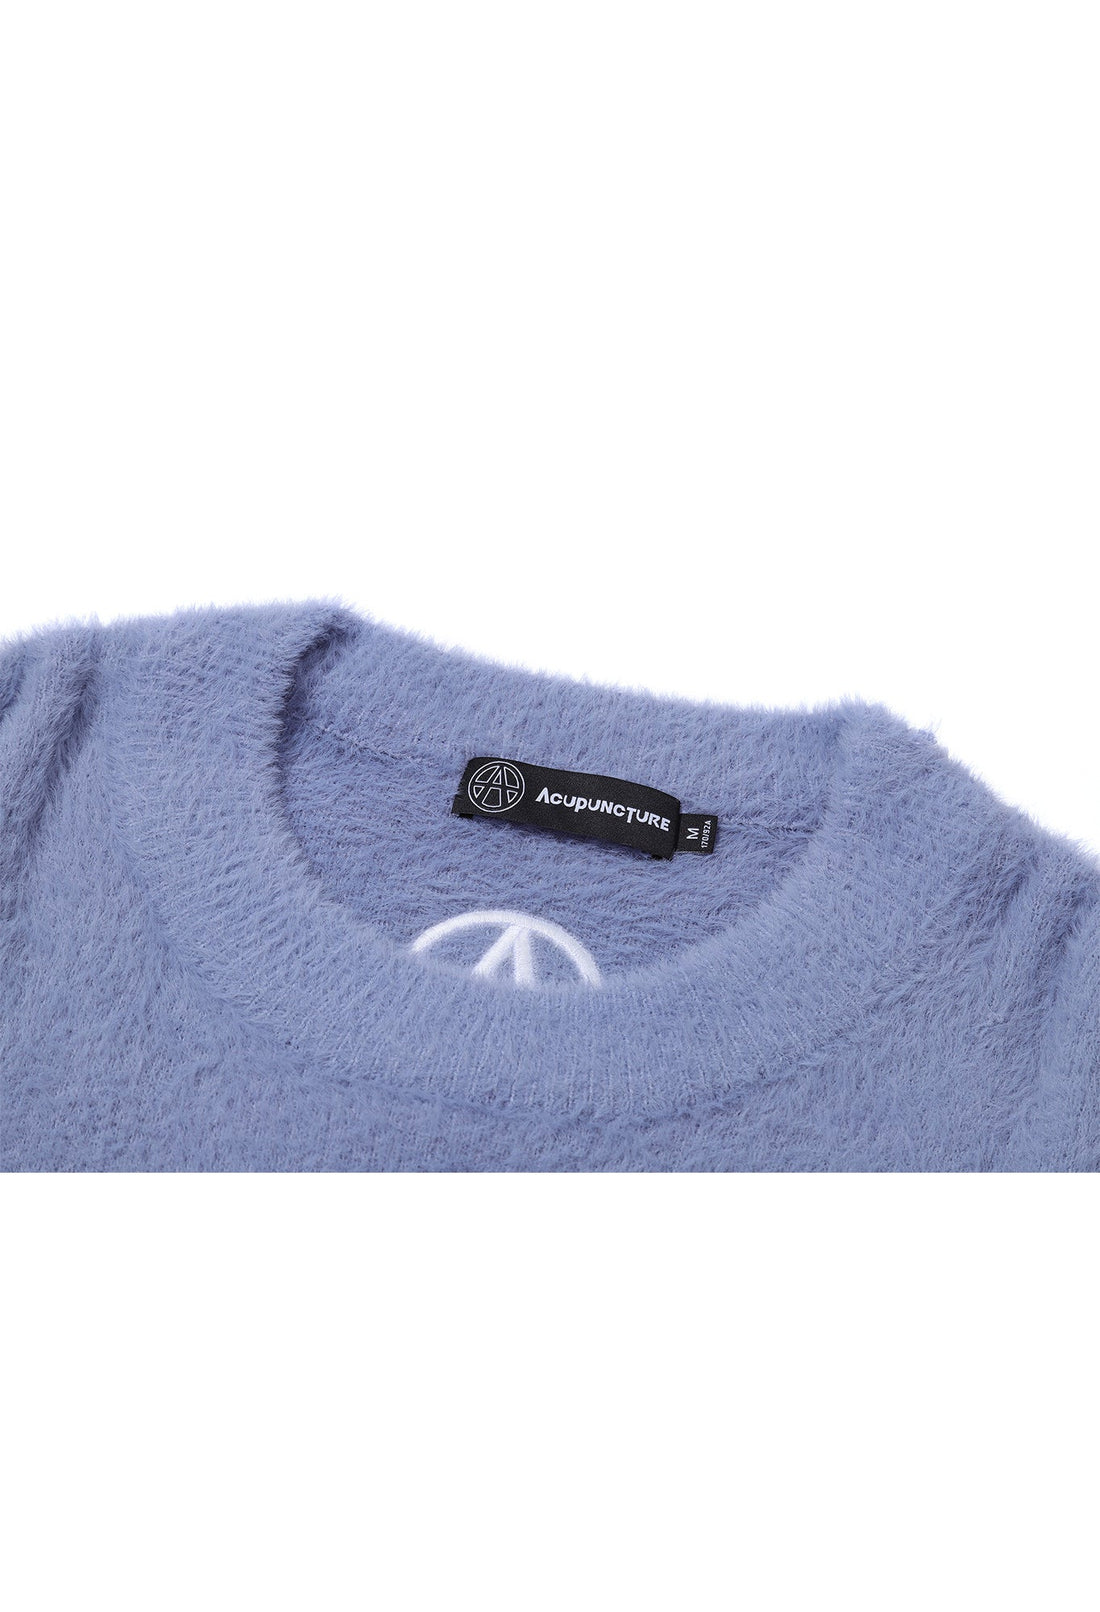 MOTTO SWEATER BLUE/YELLOW Acupuncture